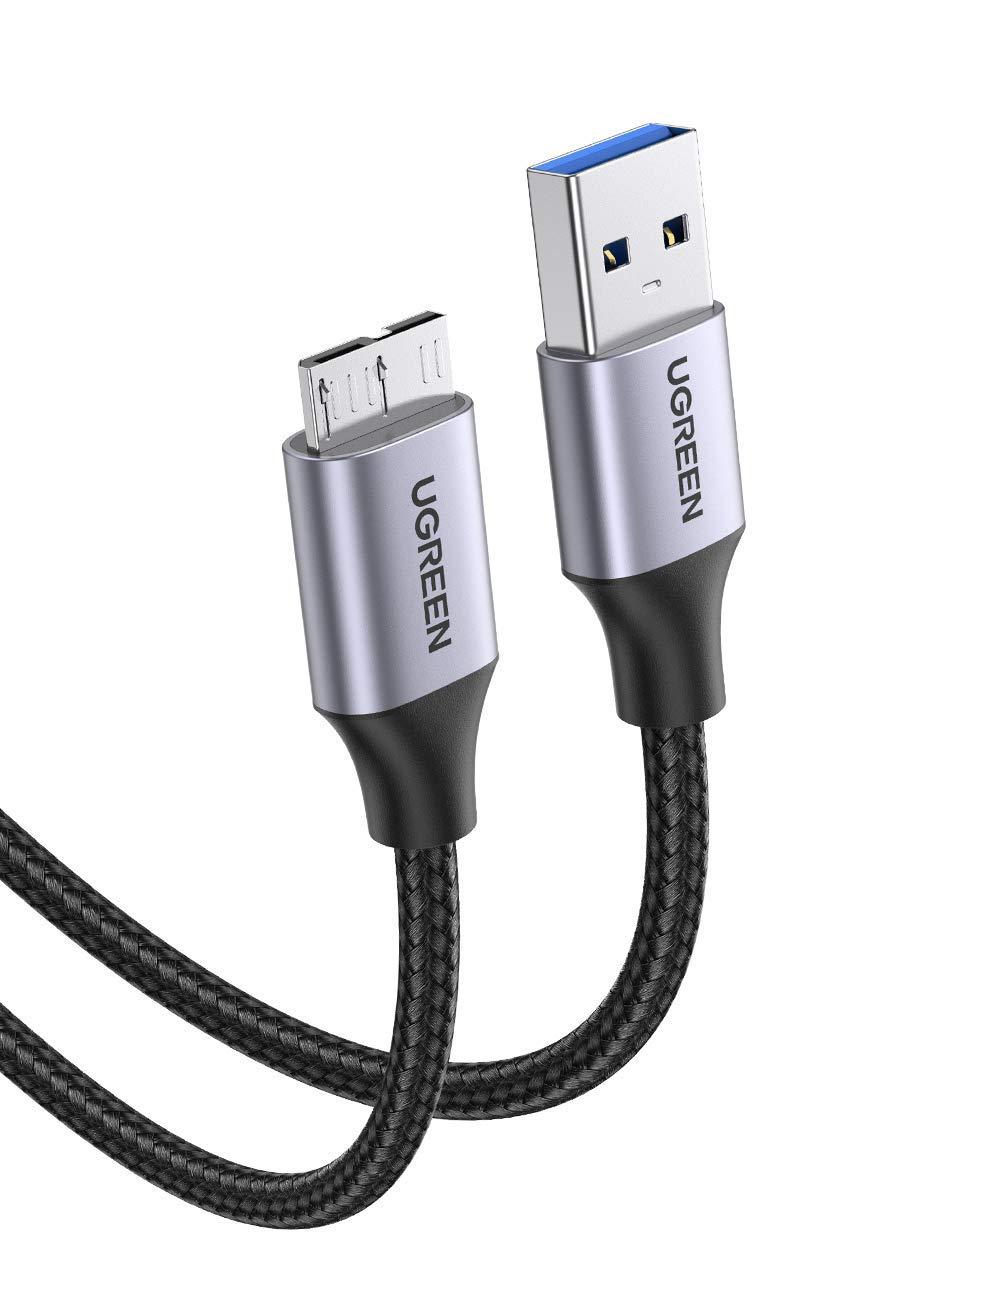 UGREEN USB 3.0 Micro Cable A-Male to Micro-B Micro USB Charging Cable Nylon Braided External Hard Drive Cable Compatible with Samsung Galaxy S5, Note 3, Note Pro 12.2, Toshiba, WD Camera, etc 1.5 FT - LeoForward Australia